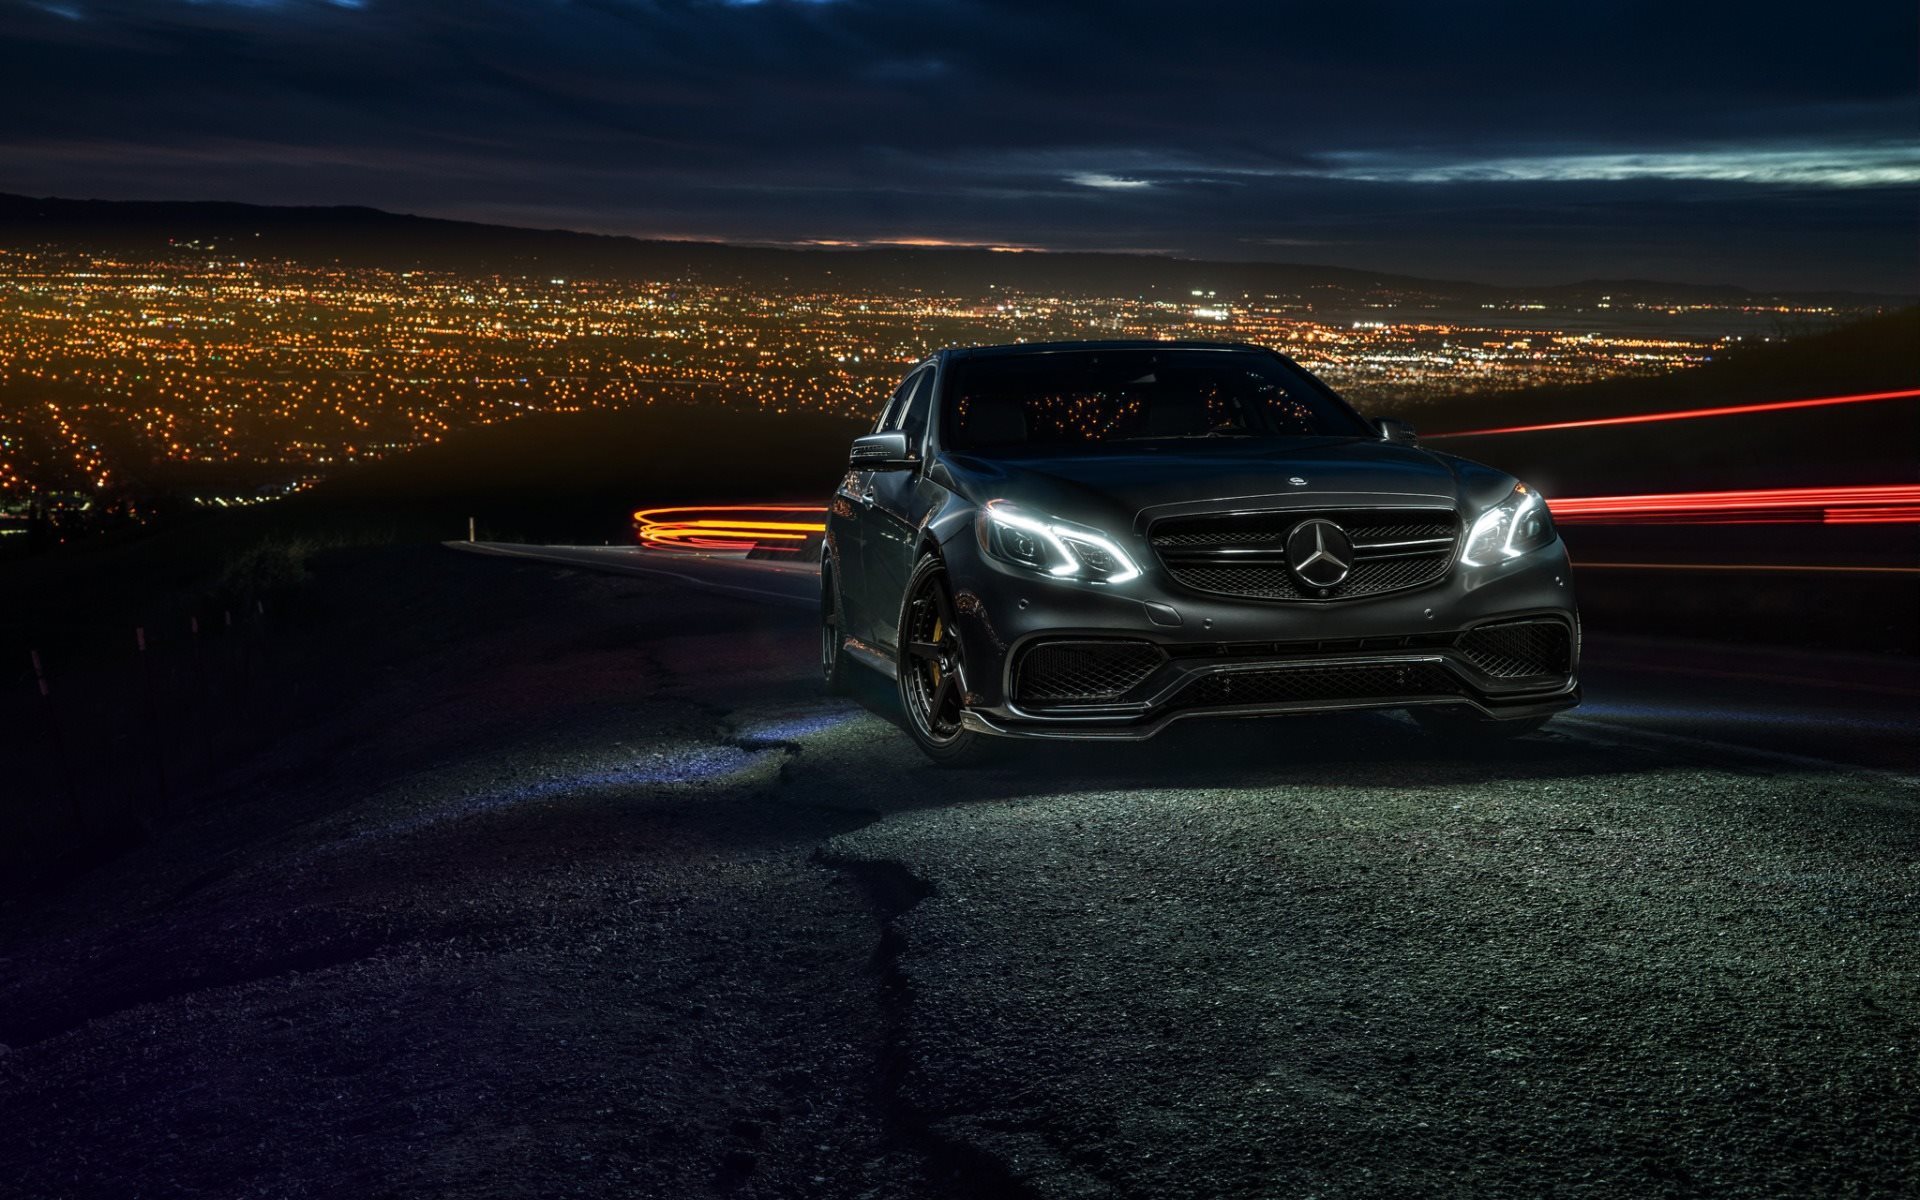 Download Wallpaper Mercedes Benz E63 AMG S, 2017 Cars, Night, Supercars, Headlights, Mercedes For Desktop With Resolution 1920x1200. High Quality HD Picture Wallpaper